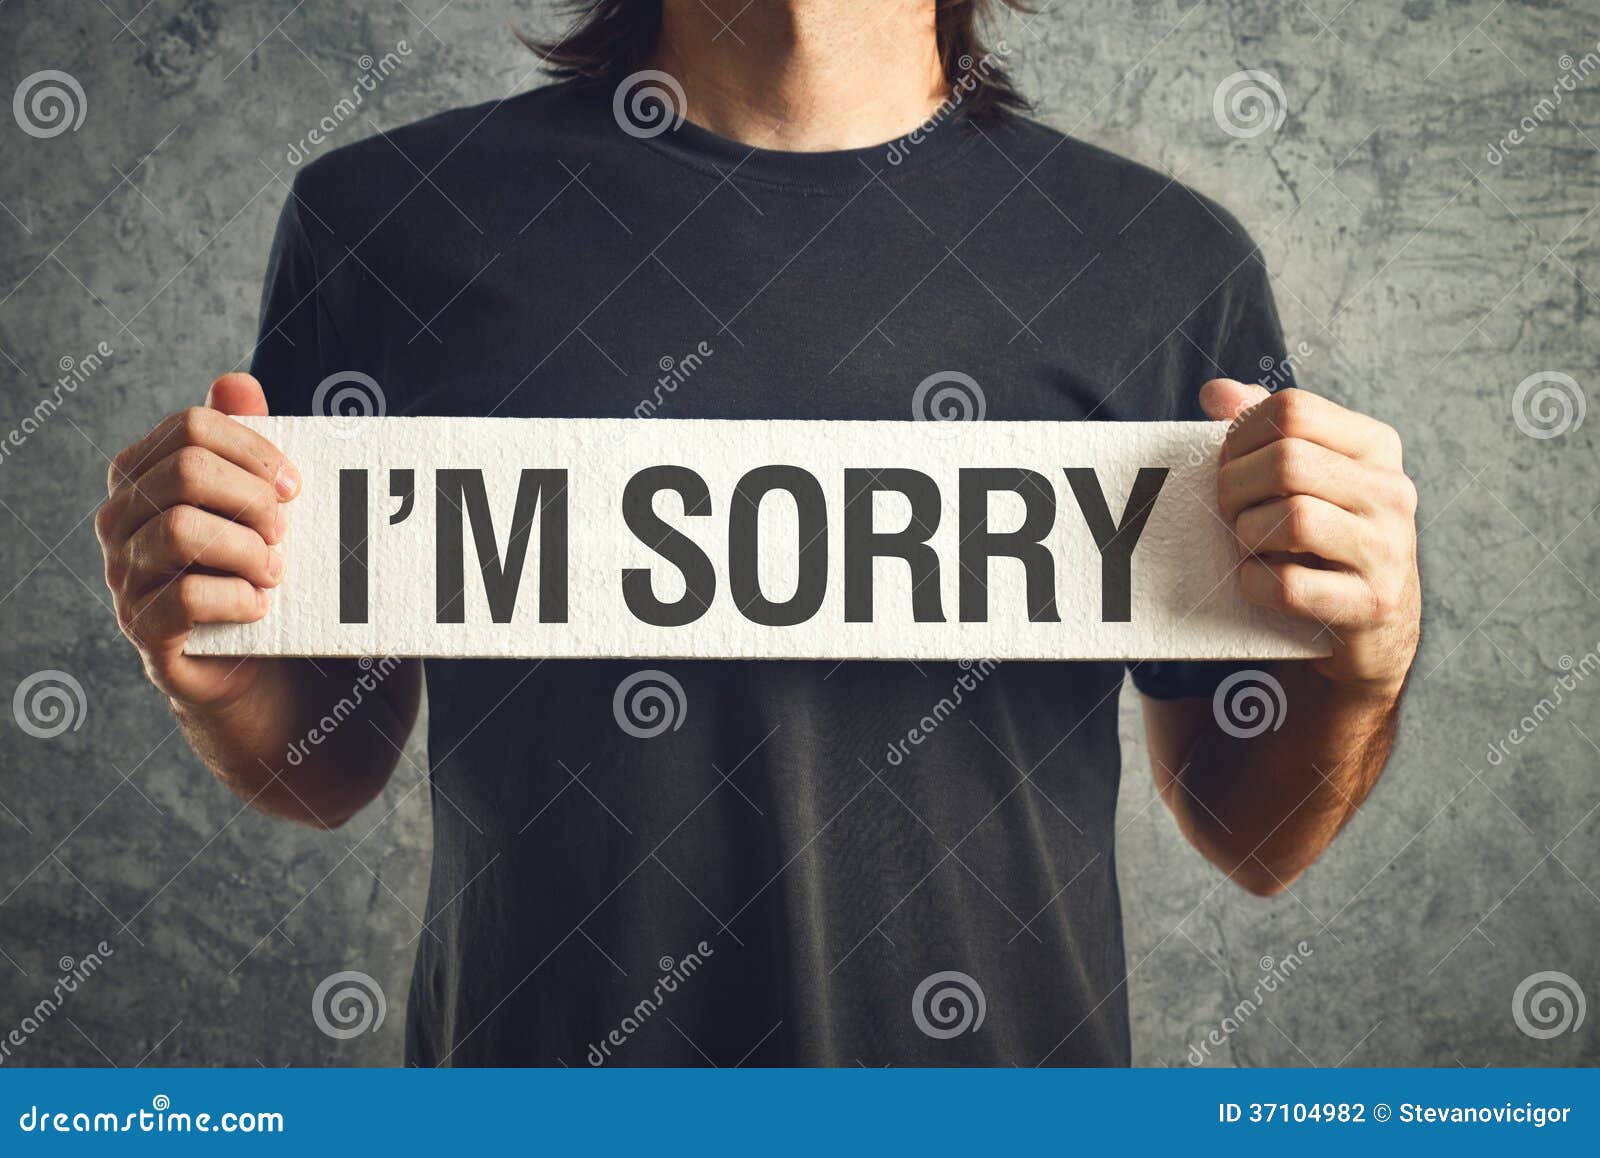 I am sorry message stock photo. Image of emotion, repentance ...